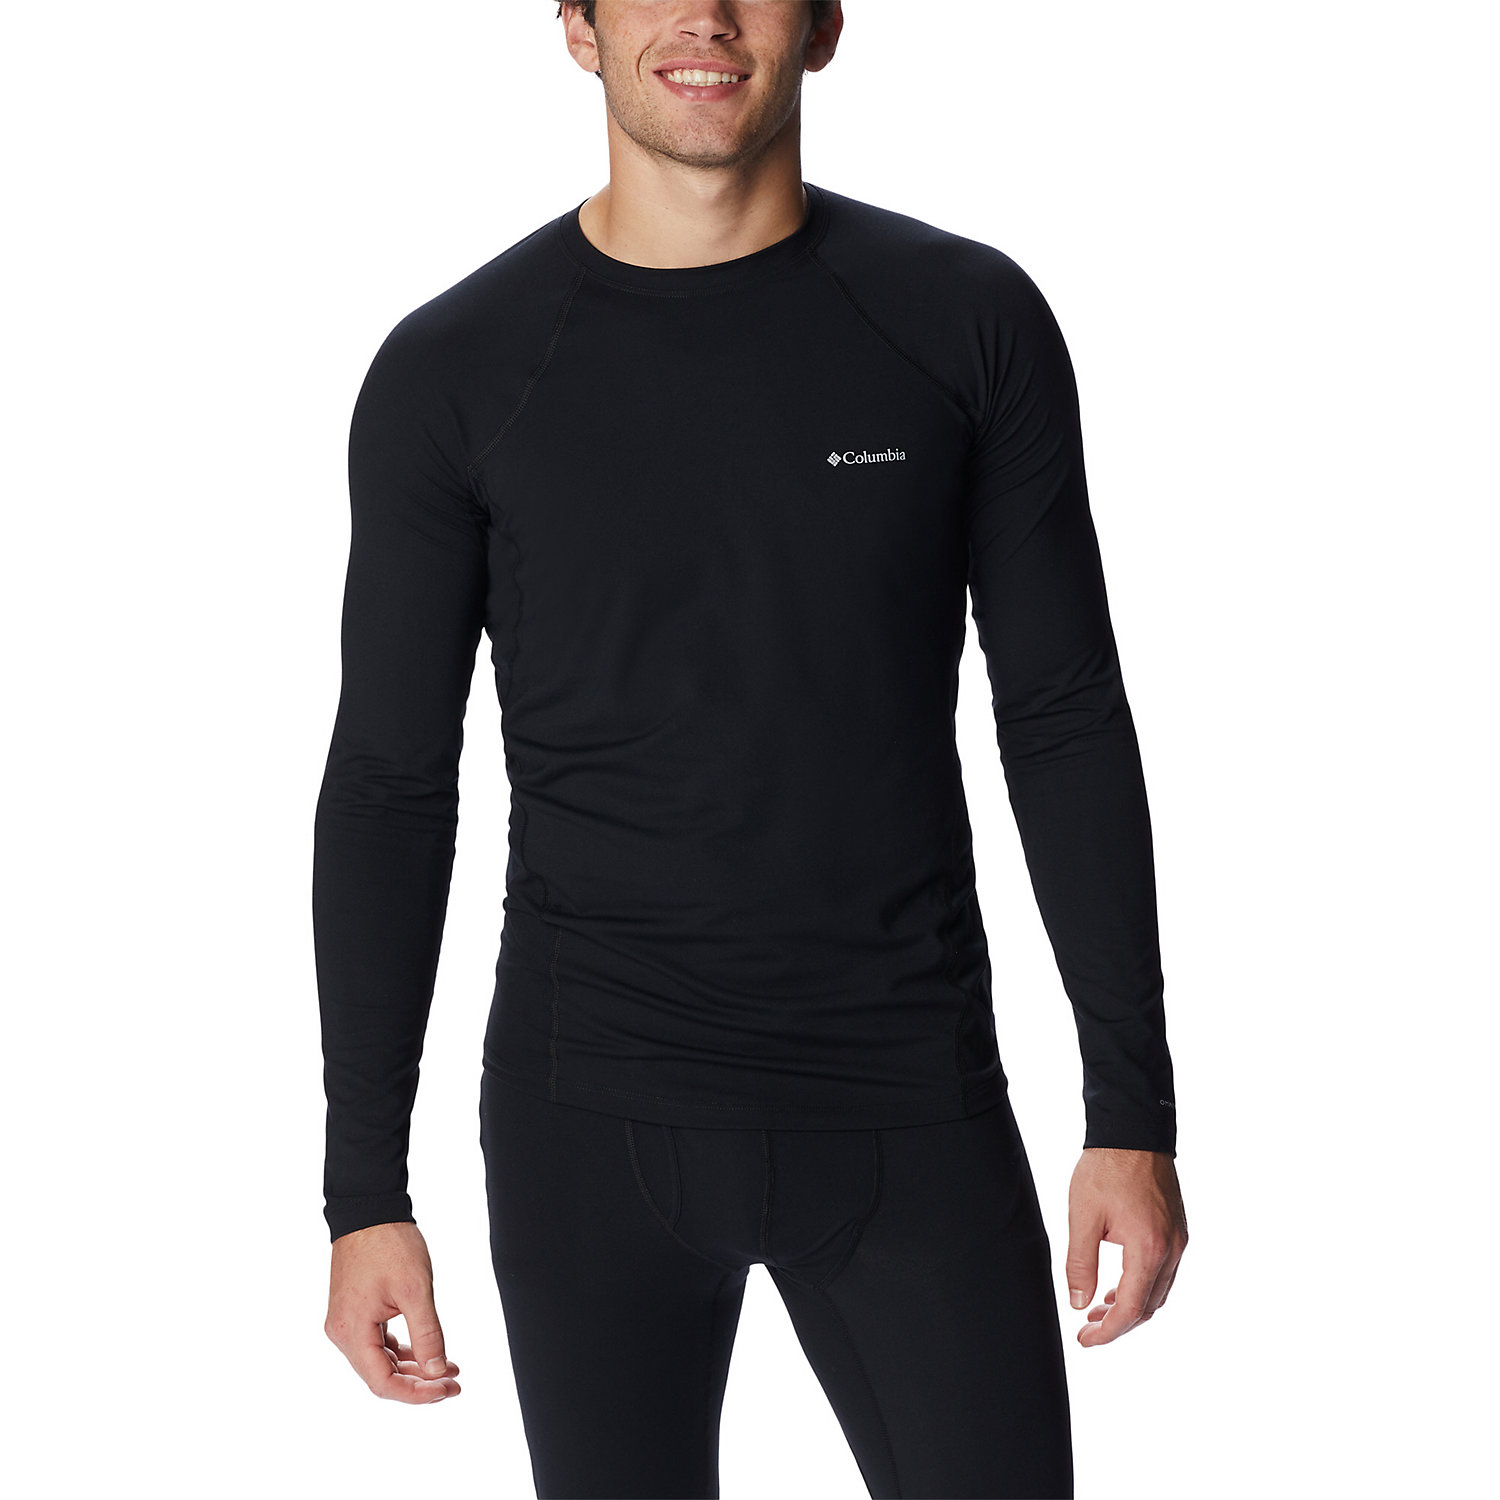 Columbia Mens Midweight Stretch LS Top